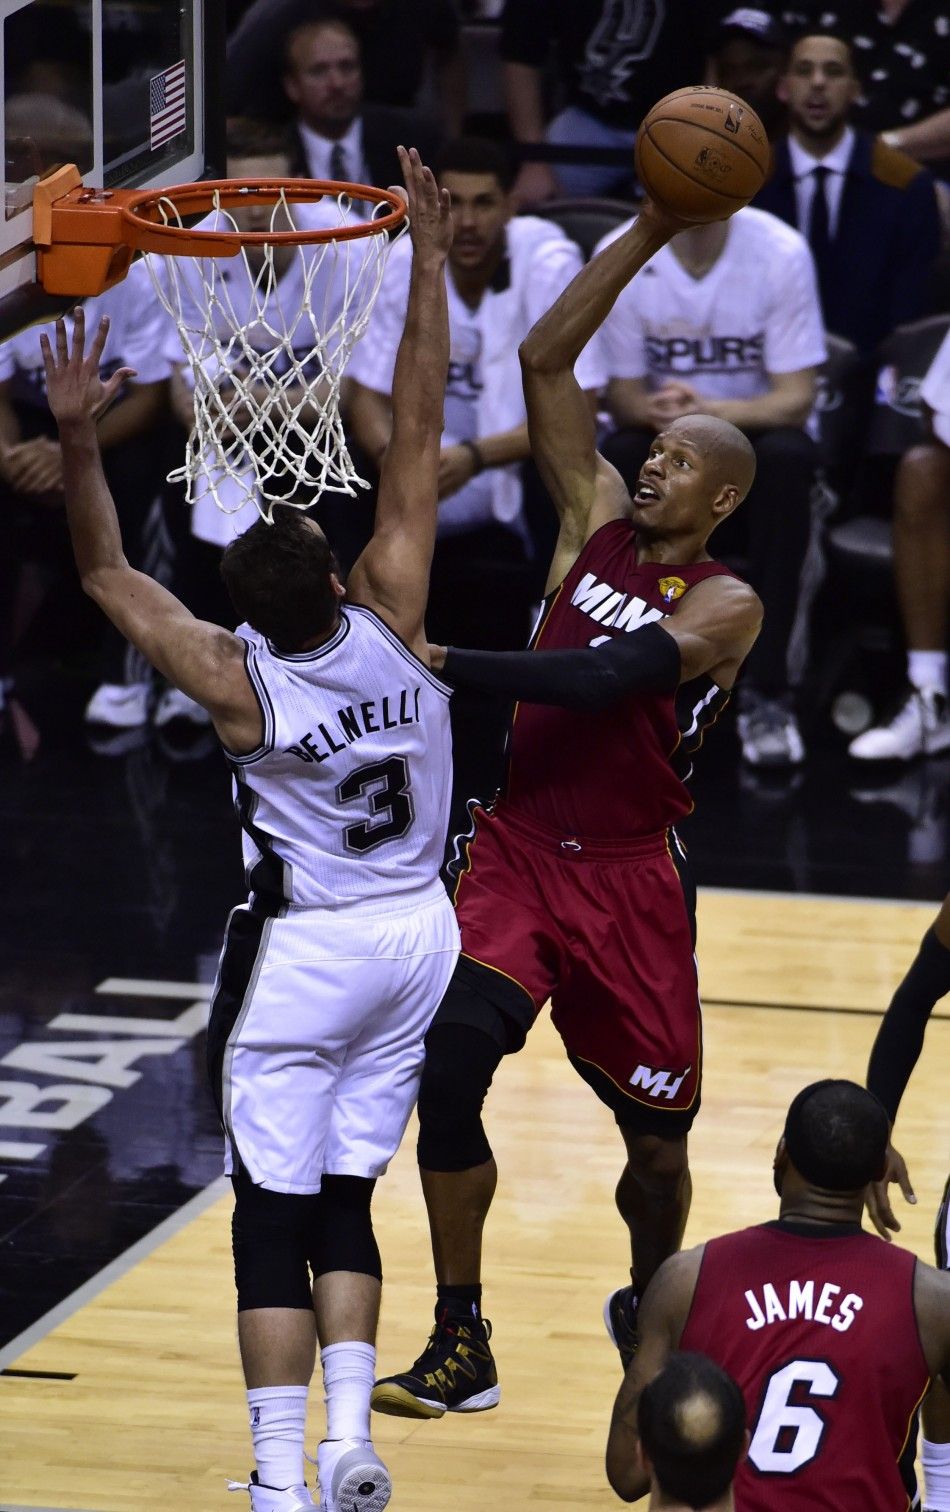 Jun 5, 2014 San Antonio, TX, USA Miami Heat guard Ray Allen 34 shoots against San Antonio Spurs guard Marco Belinelli 2 during the second half in game one of the 2014 NBA Finals at ATT Center. 